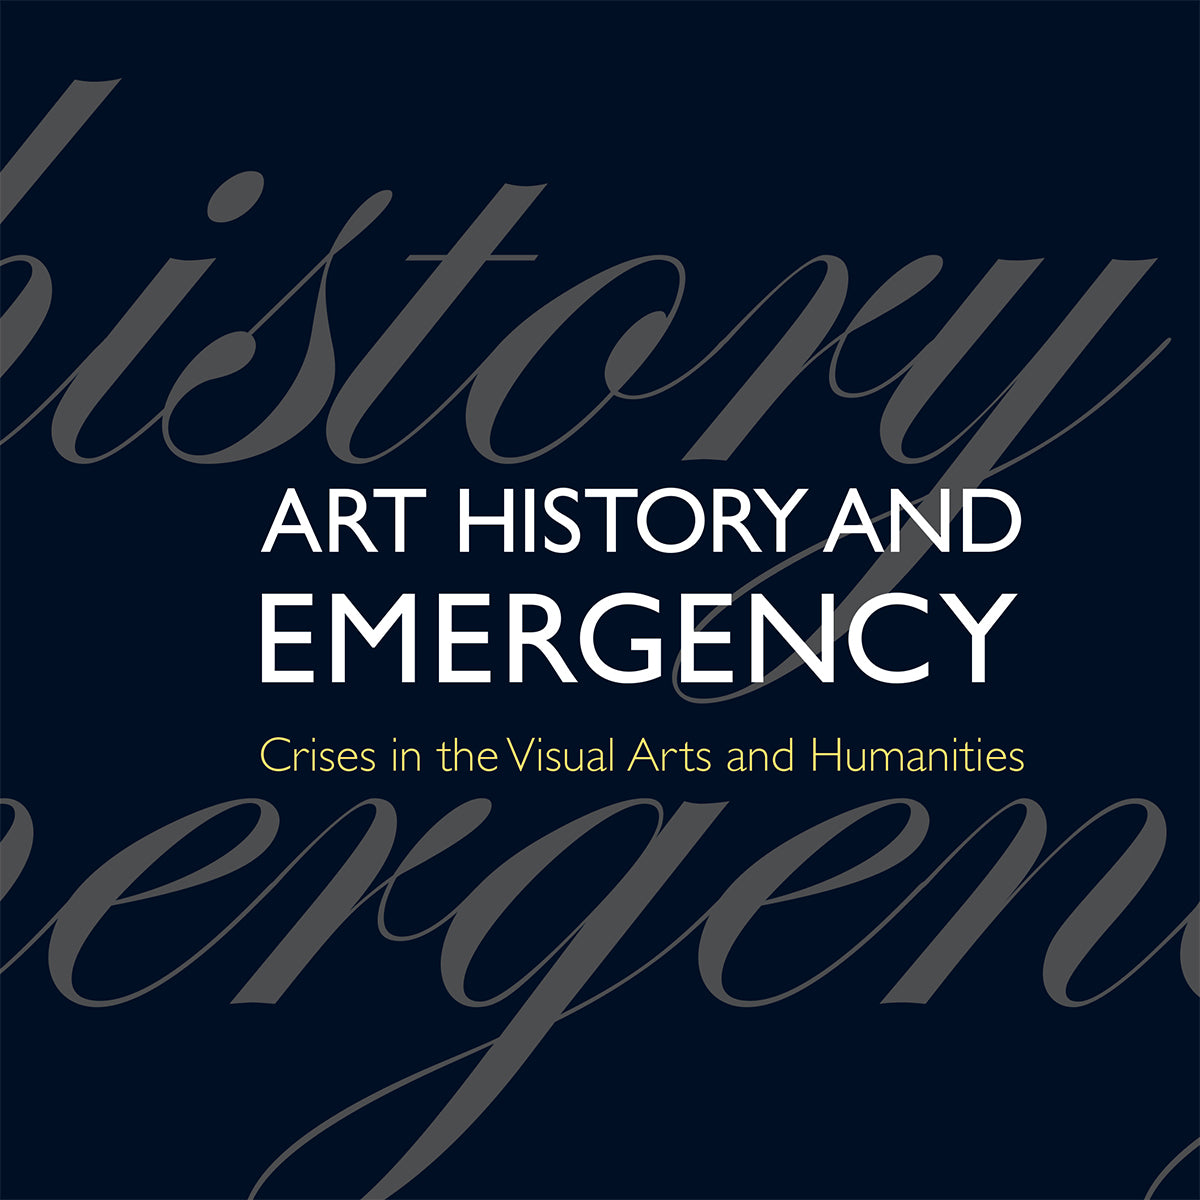 Art History and Emergency: Crises in the Visual Arts and Humanities